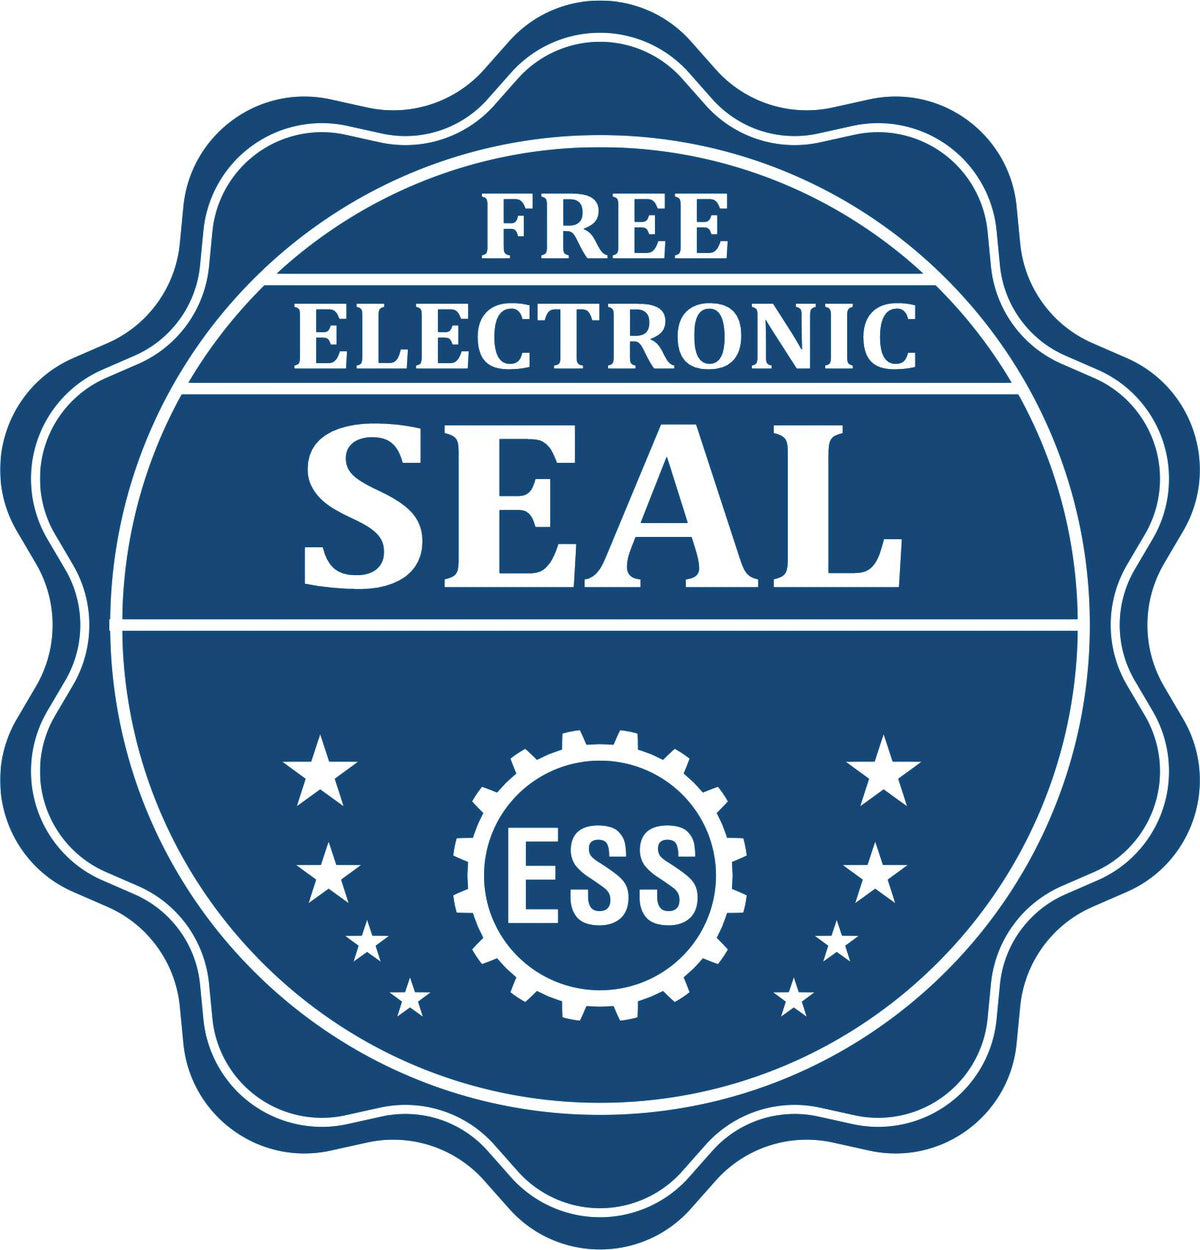 A badge showing a free electronic seal for the Pennsylvania Desk Architect Embossing Seal with stars and the ESS gear on the emblem.